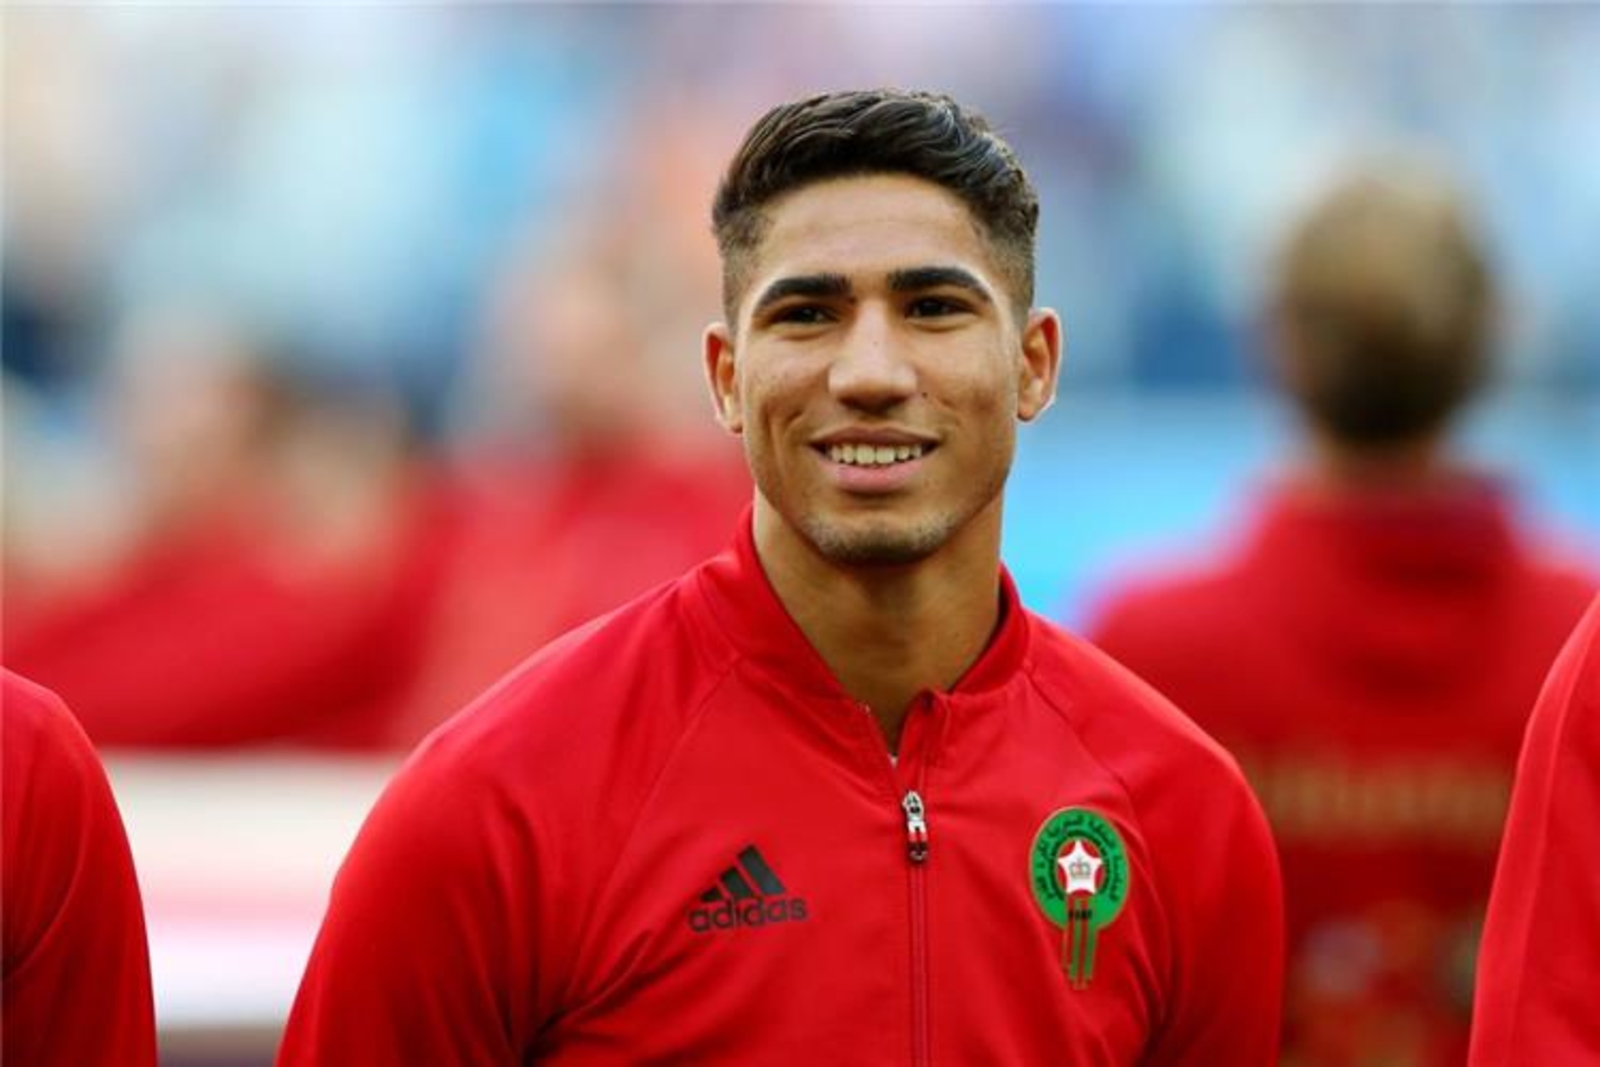  Achraf Hakimi, a Moroccan professional soccer player who plays for Paris Saint-Germain, wearing a red uniform smiles in front of the camera.